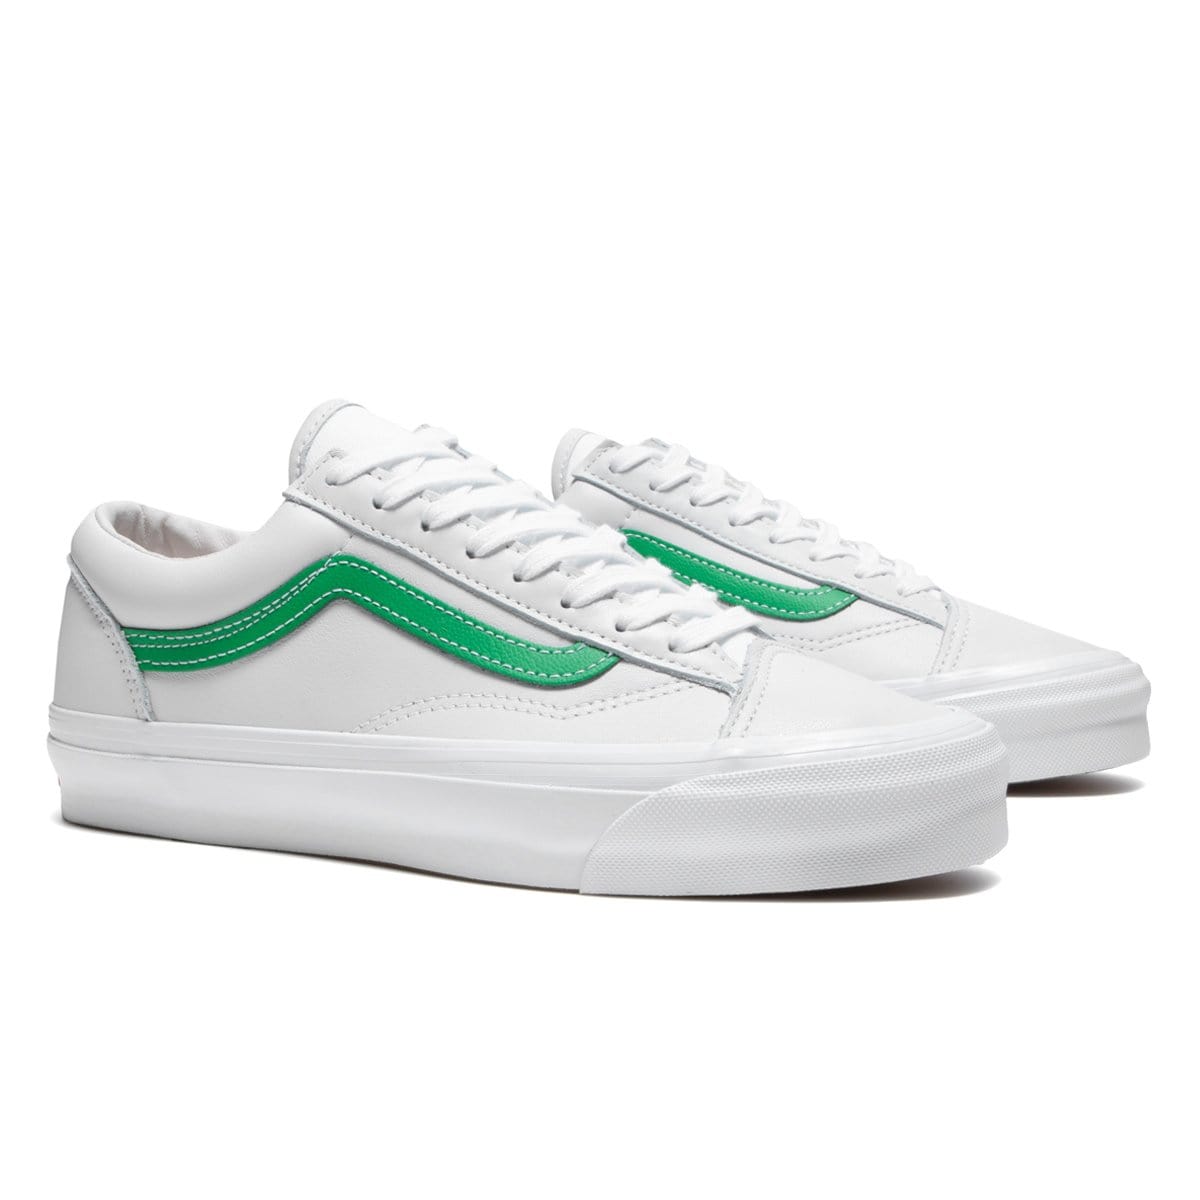 Vault by Vans Shoes OG STYLE 36 LX (LEATHER)